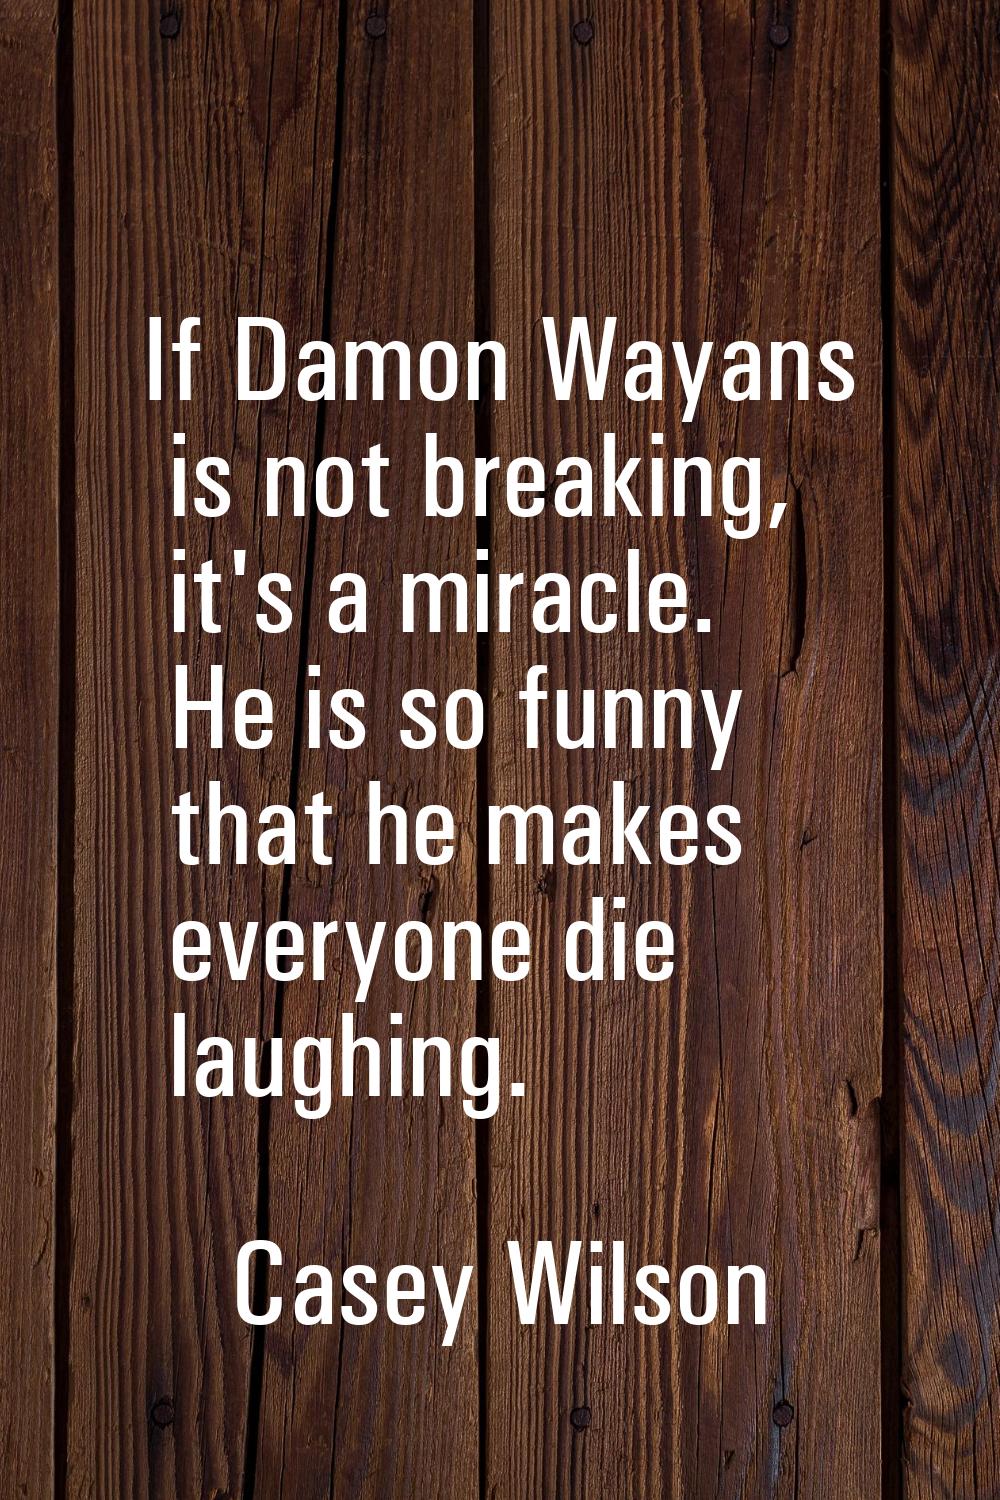 If Damon Wayans is not breaking, it's a miracle. He is so funny that he makes everyone die laughing